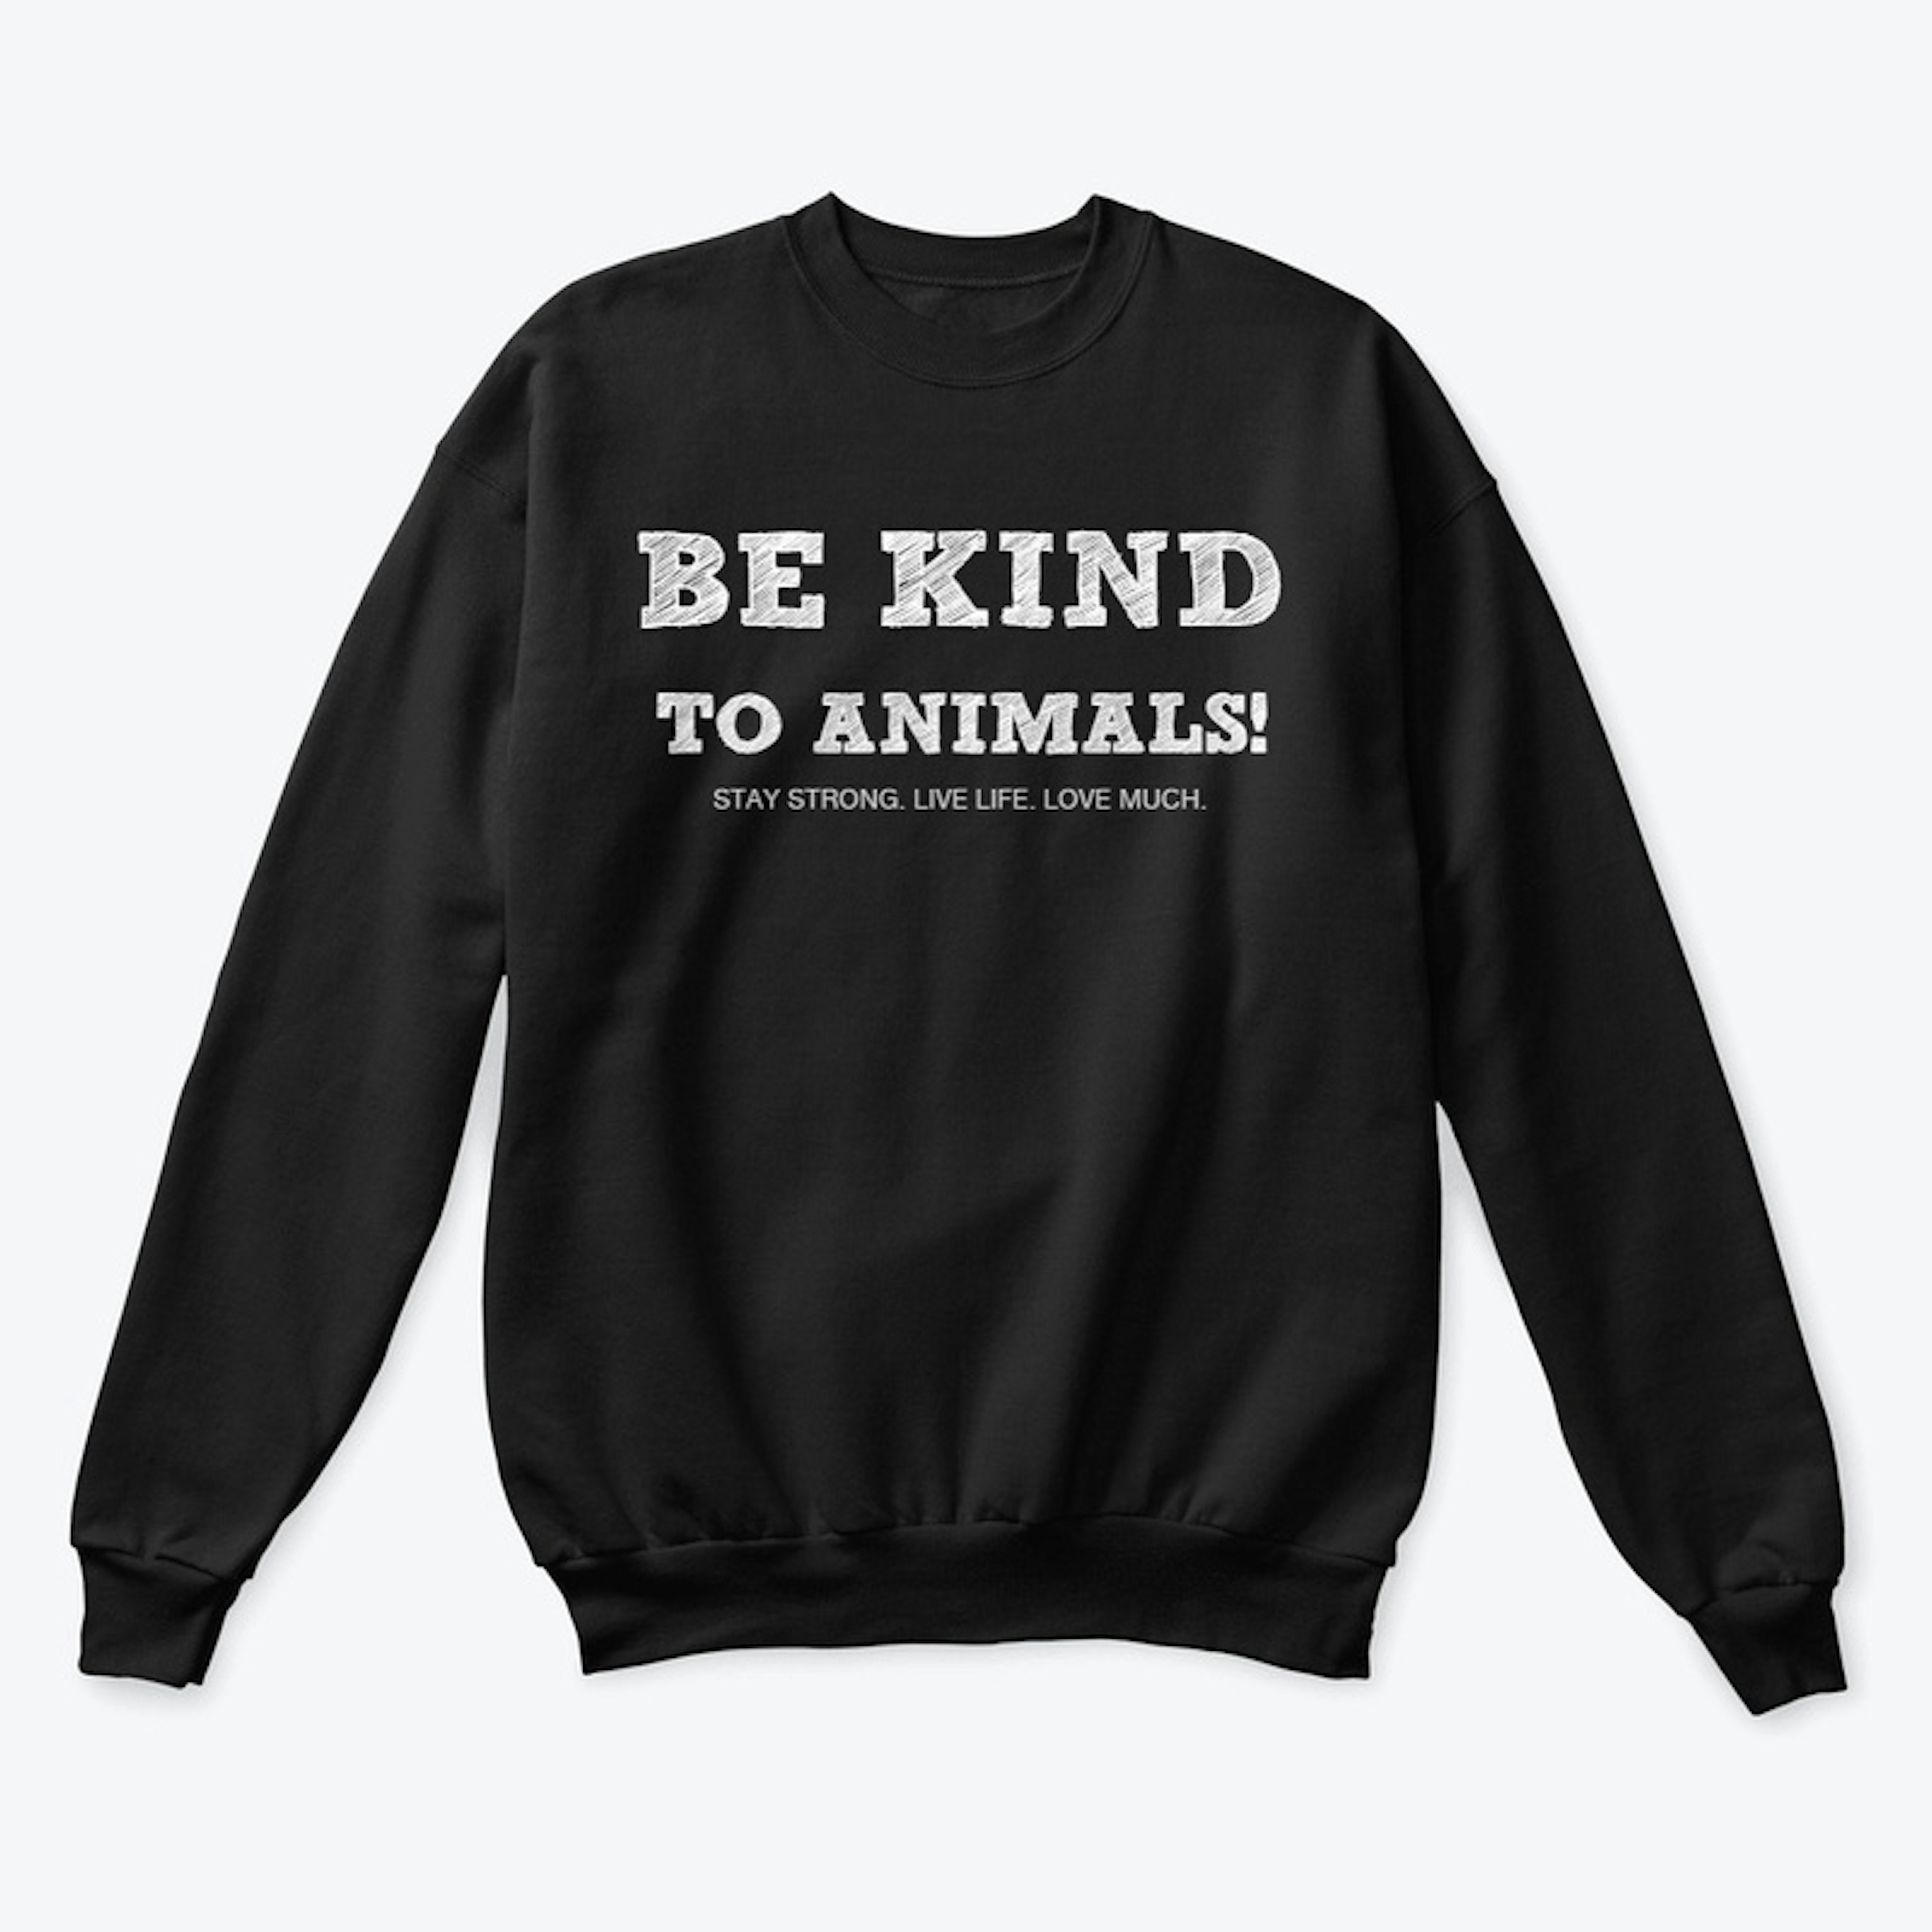 Be Kind To Animals!